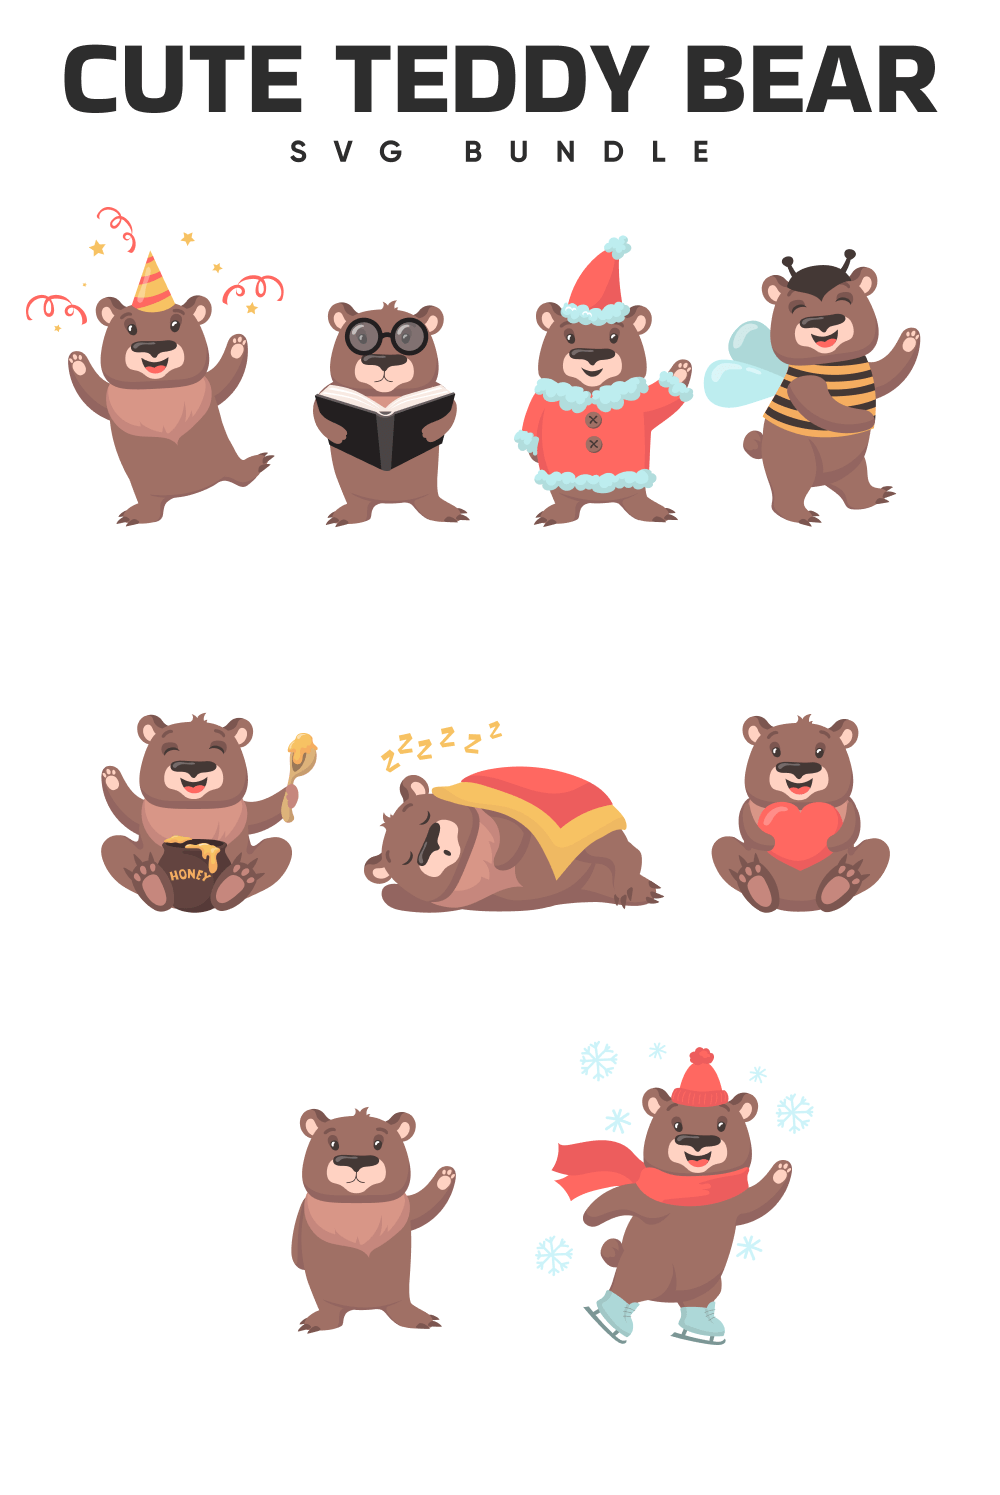 Bunch of cartoon bears with different expressions.